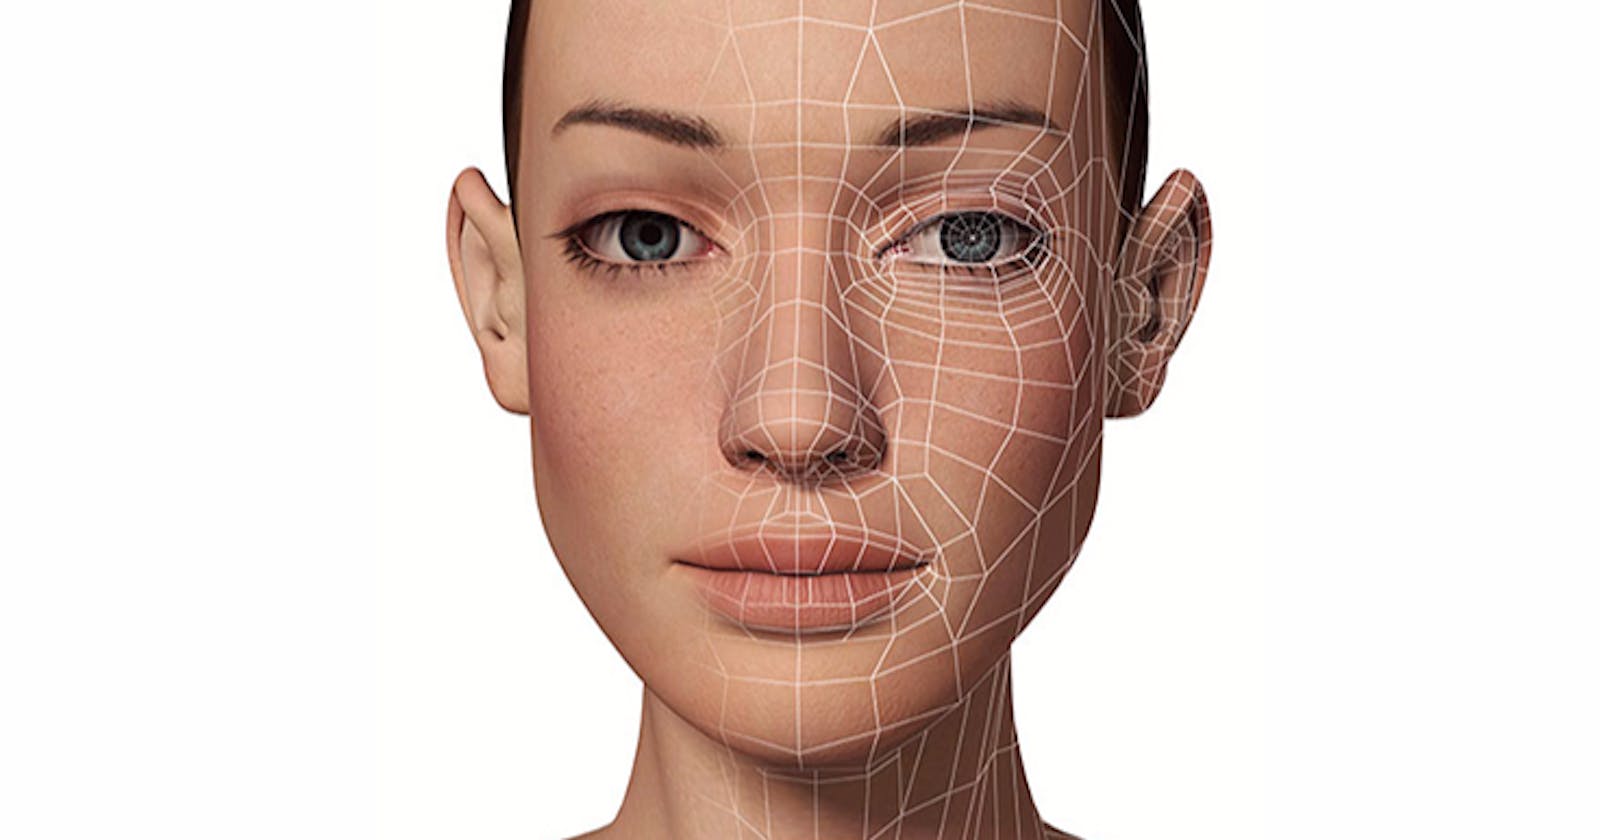 A Practical Comparison of Face Detection and Recognition Tools